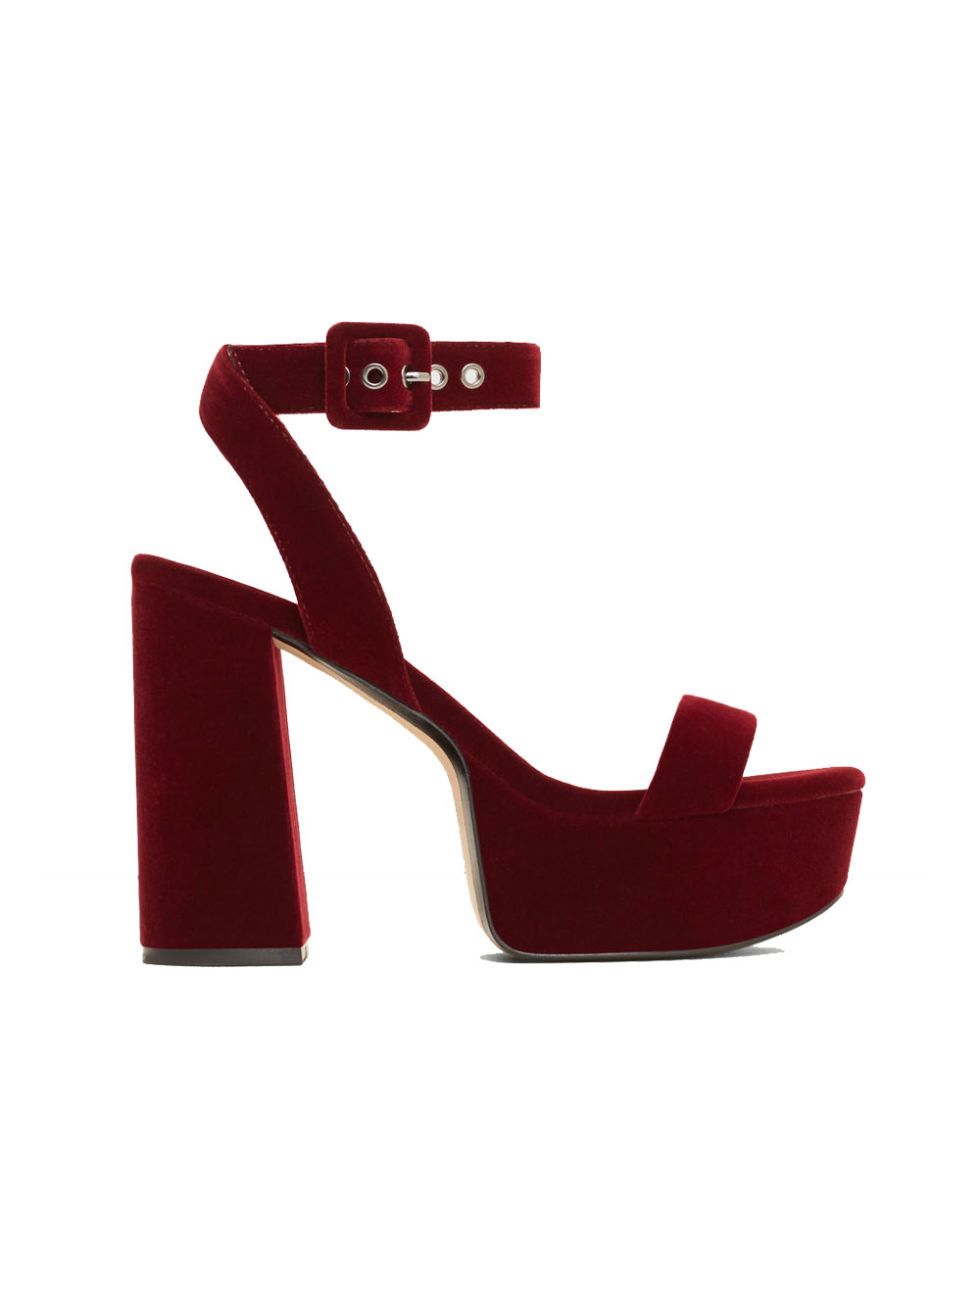 Red, High heels, Carmine, Musical instrument accessory, Maroon, Guitar accessory, Basic pump, Court shoe, Sock, Foot, 